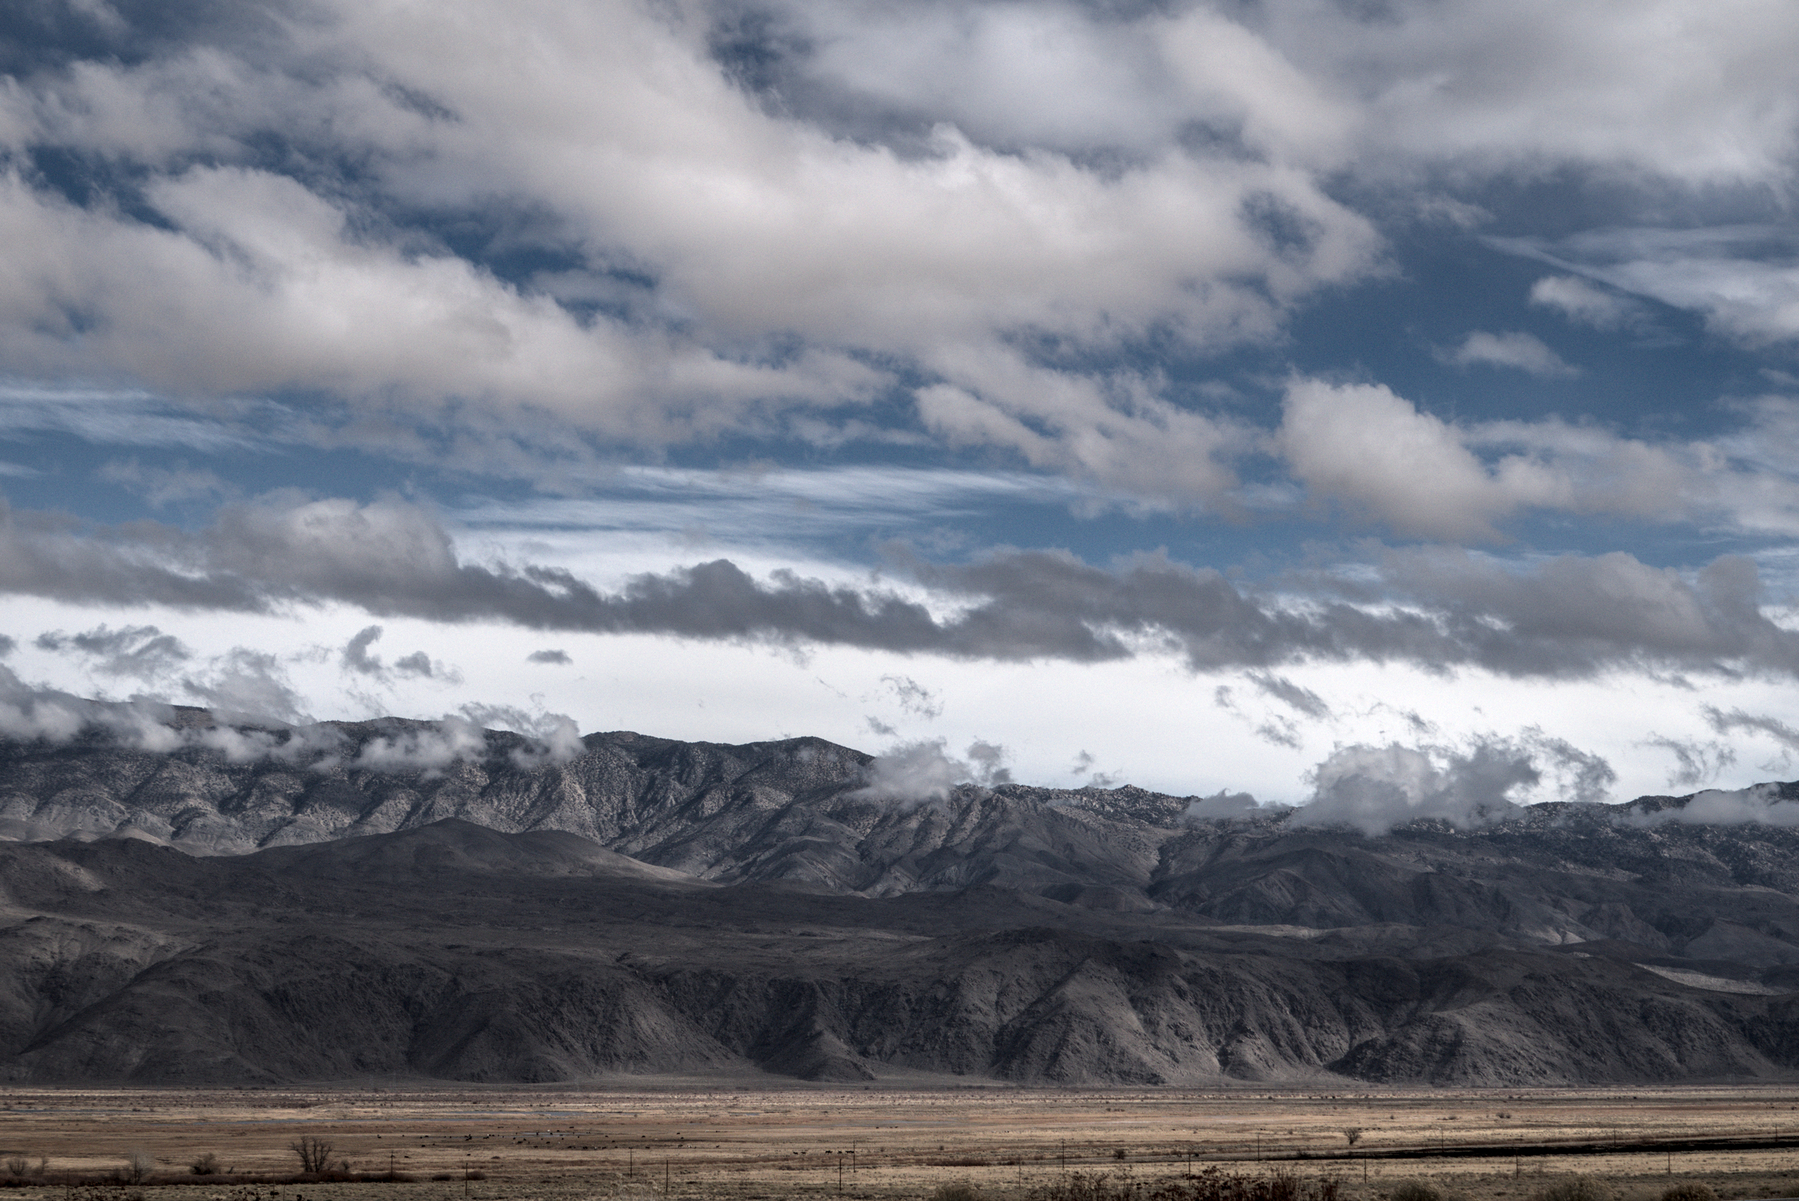 Grey-brown weathered mountains loom over a grassy valley, with clouds on the mountain peaks and above casting shadows.